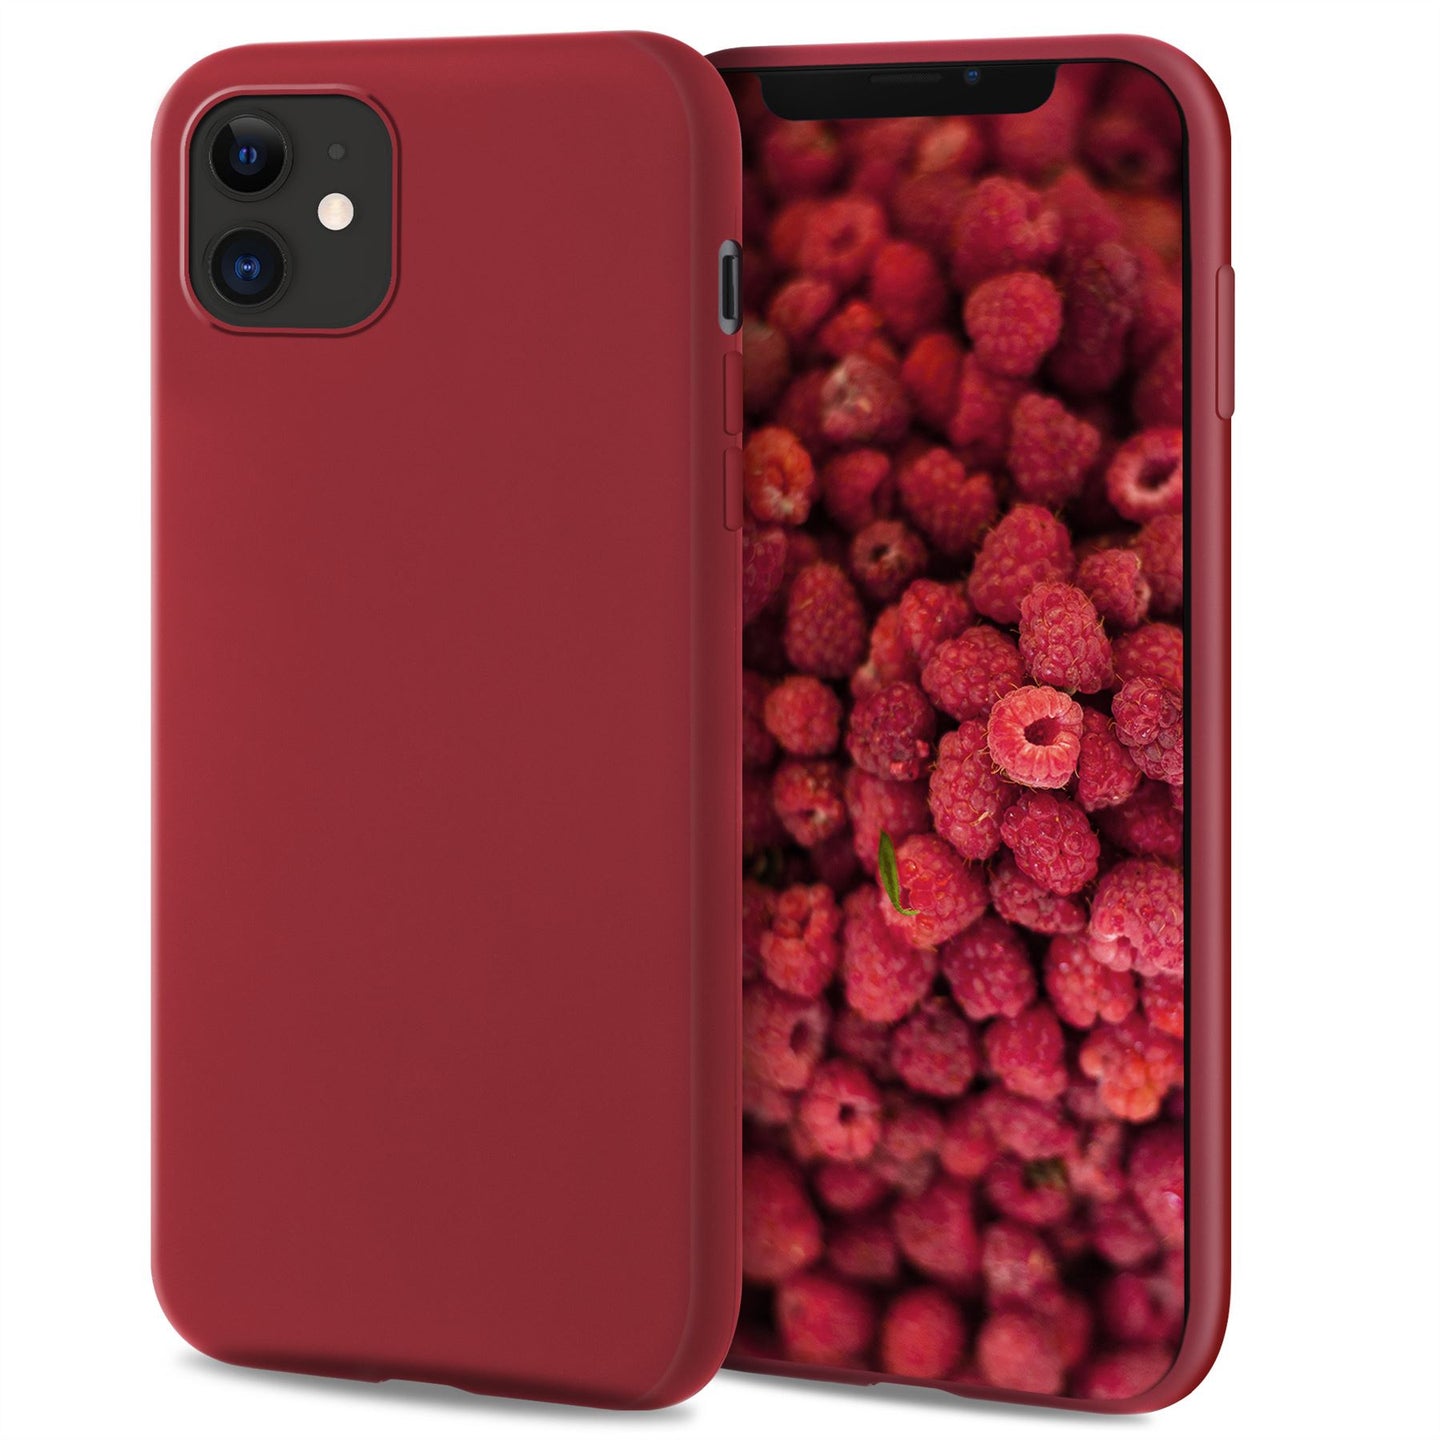 Moozy Lifestyle. Designed for iPhone 12 mini Case, Vintage Pink - Liquid Silicone Cover with Matte Finish and Soft Microfiber Lining